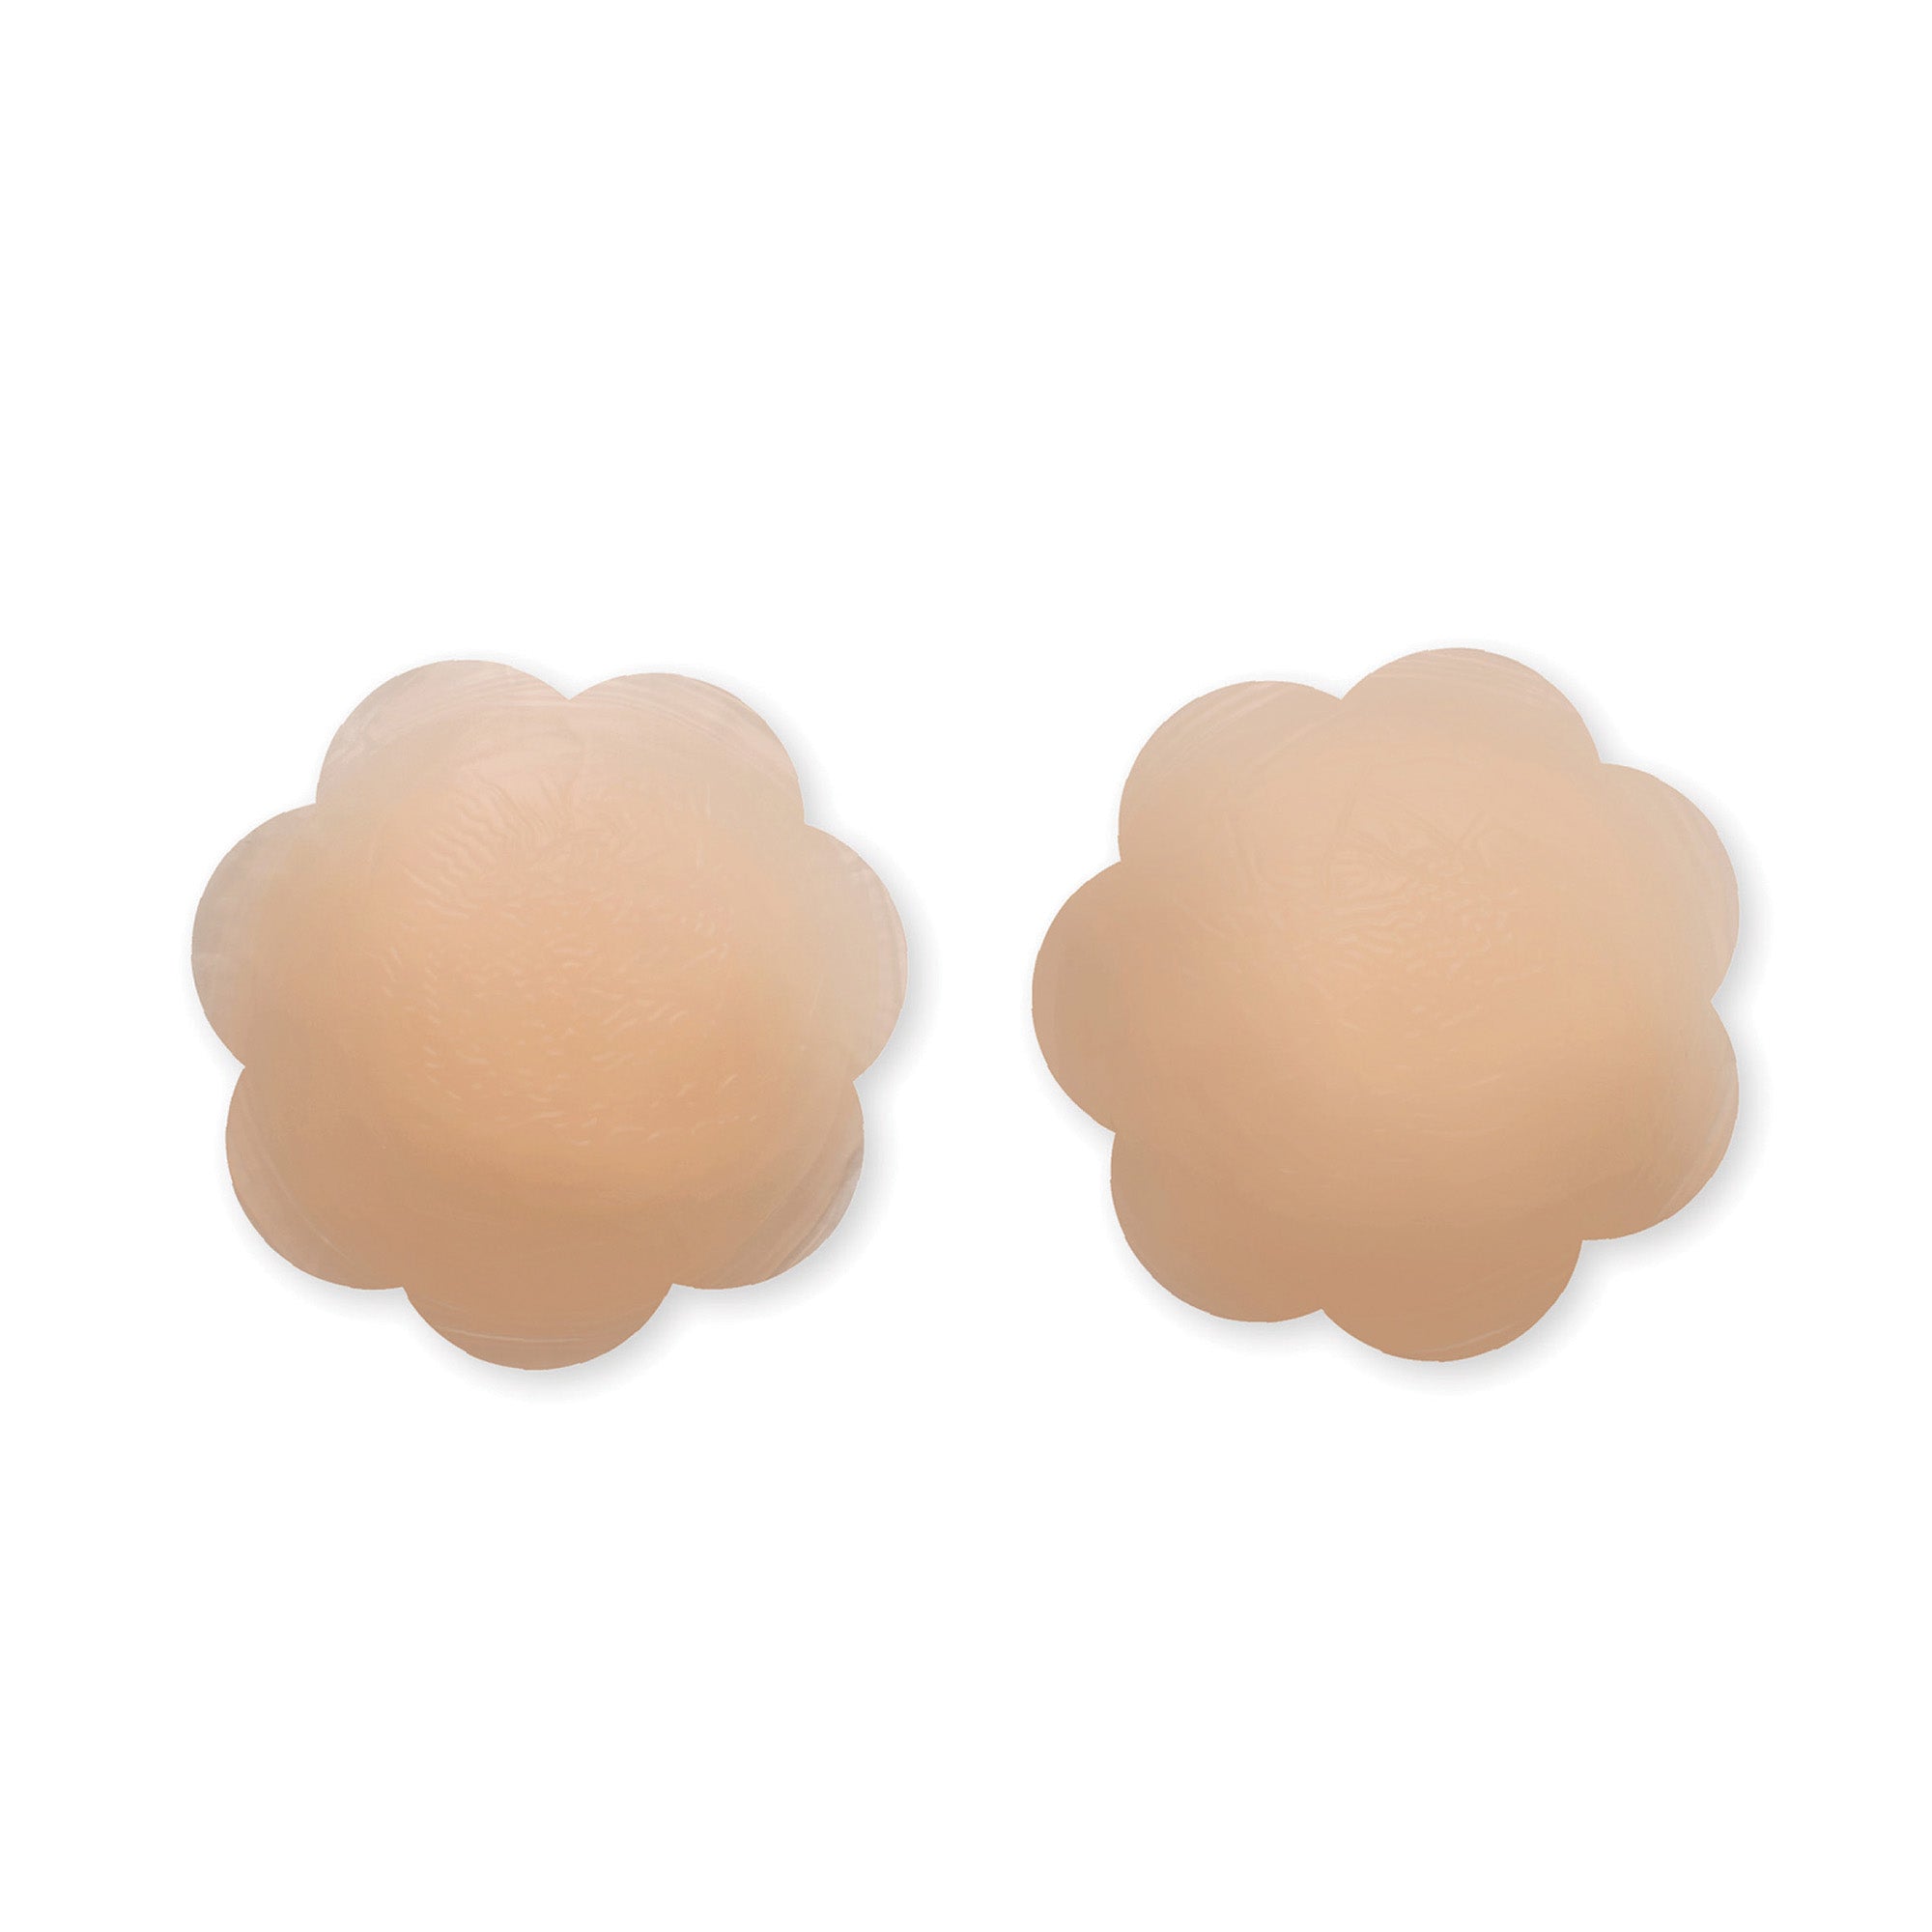 Nipple Covers, Silicone Nipple Covers & Stickers